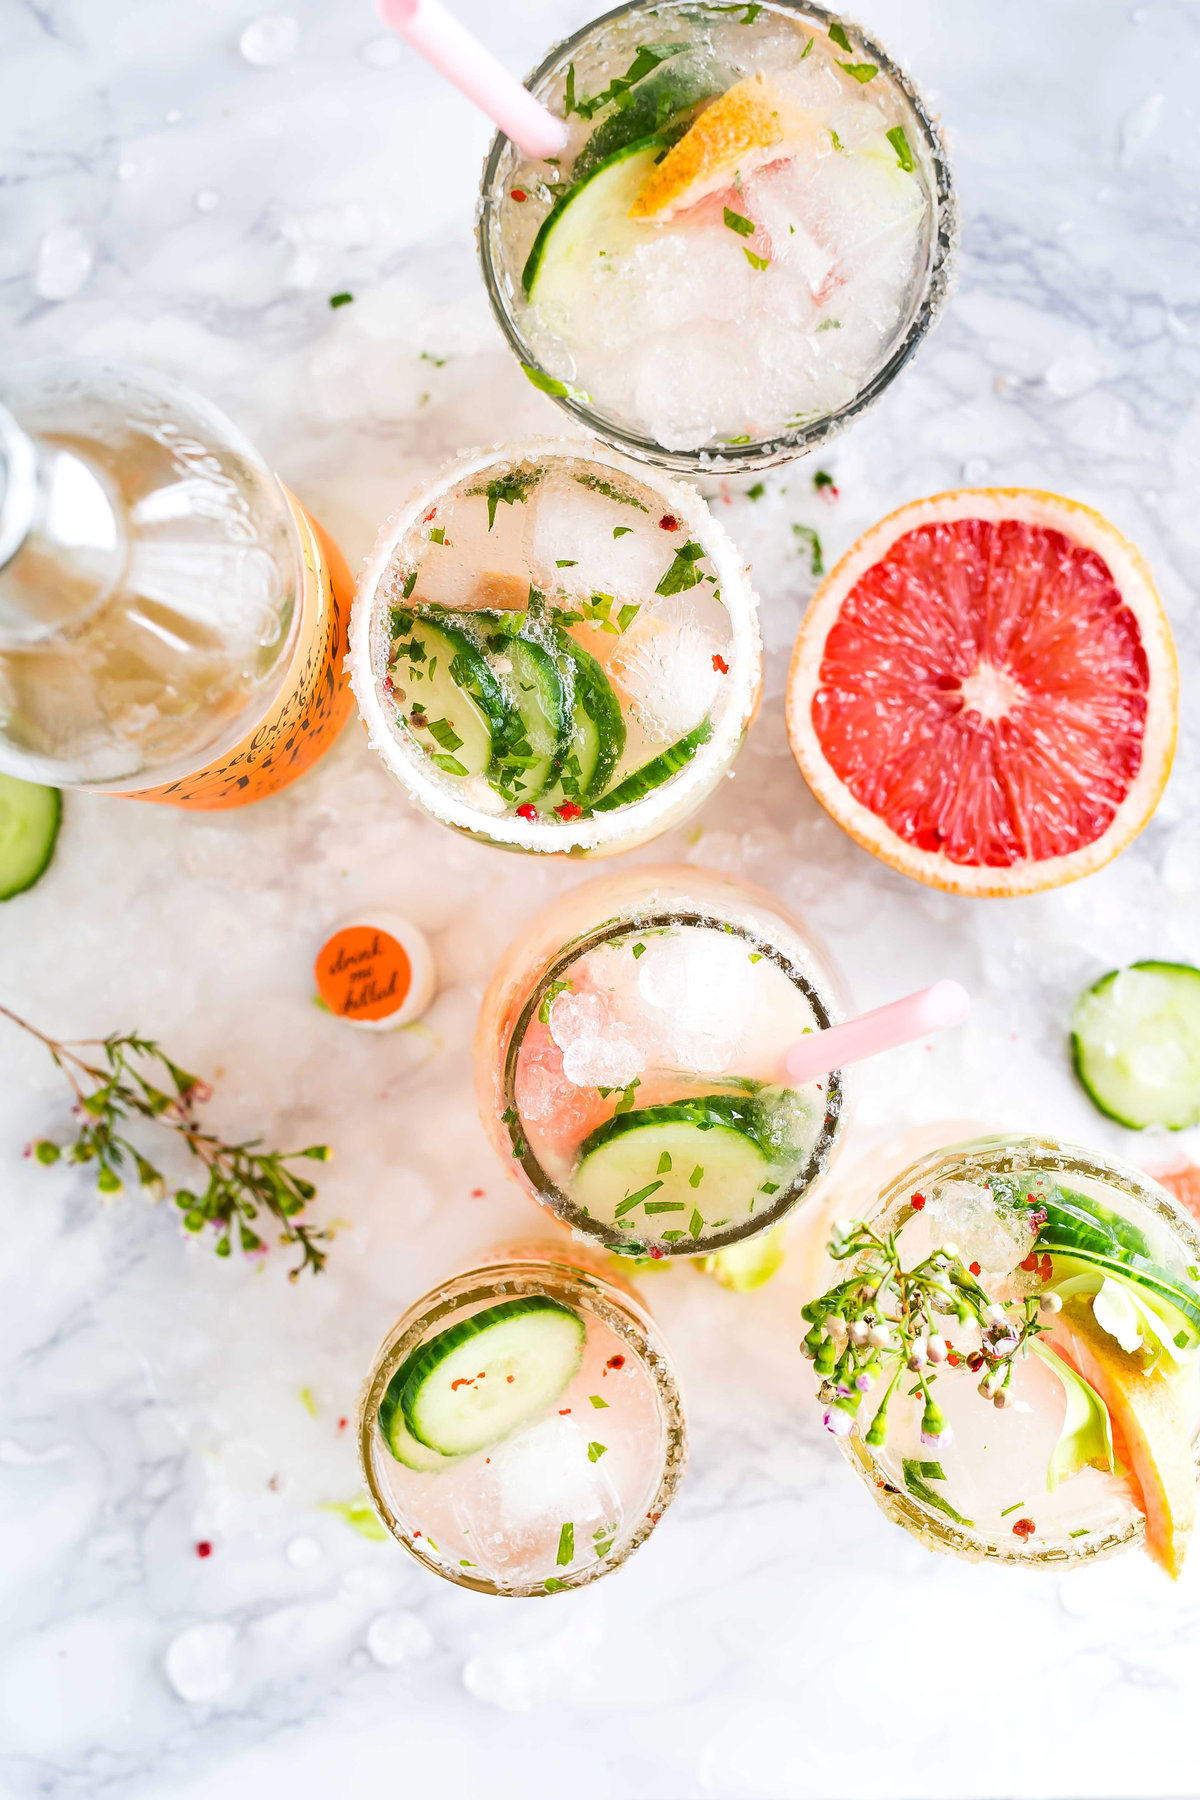 Brightly colored craft cocktails with cucumber & grapefruit